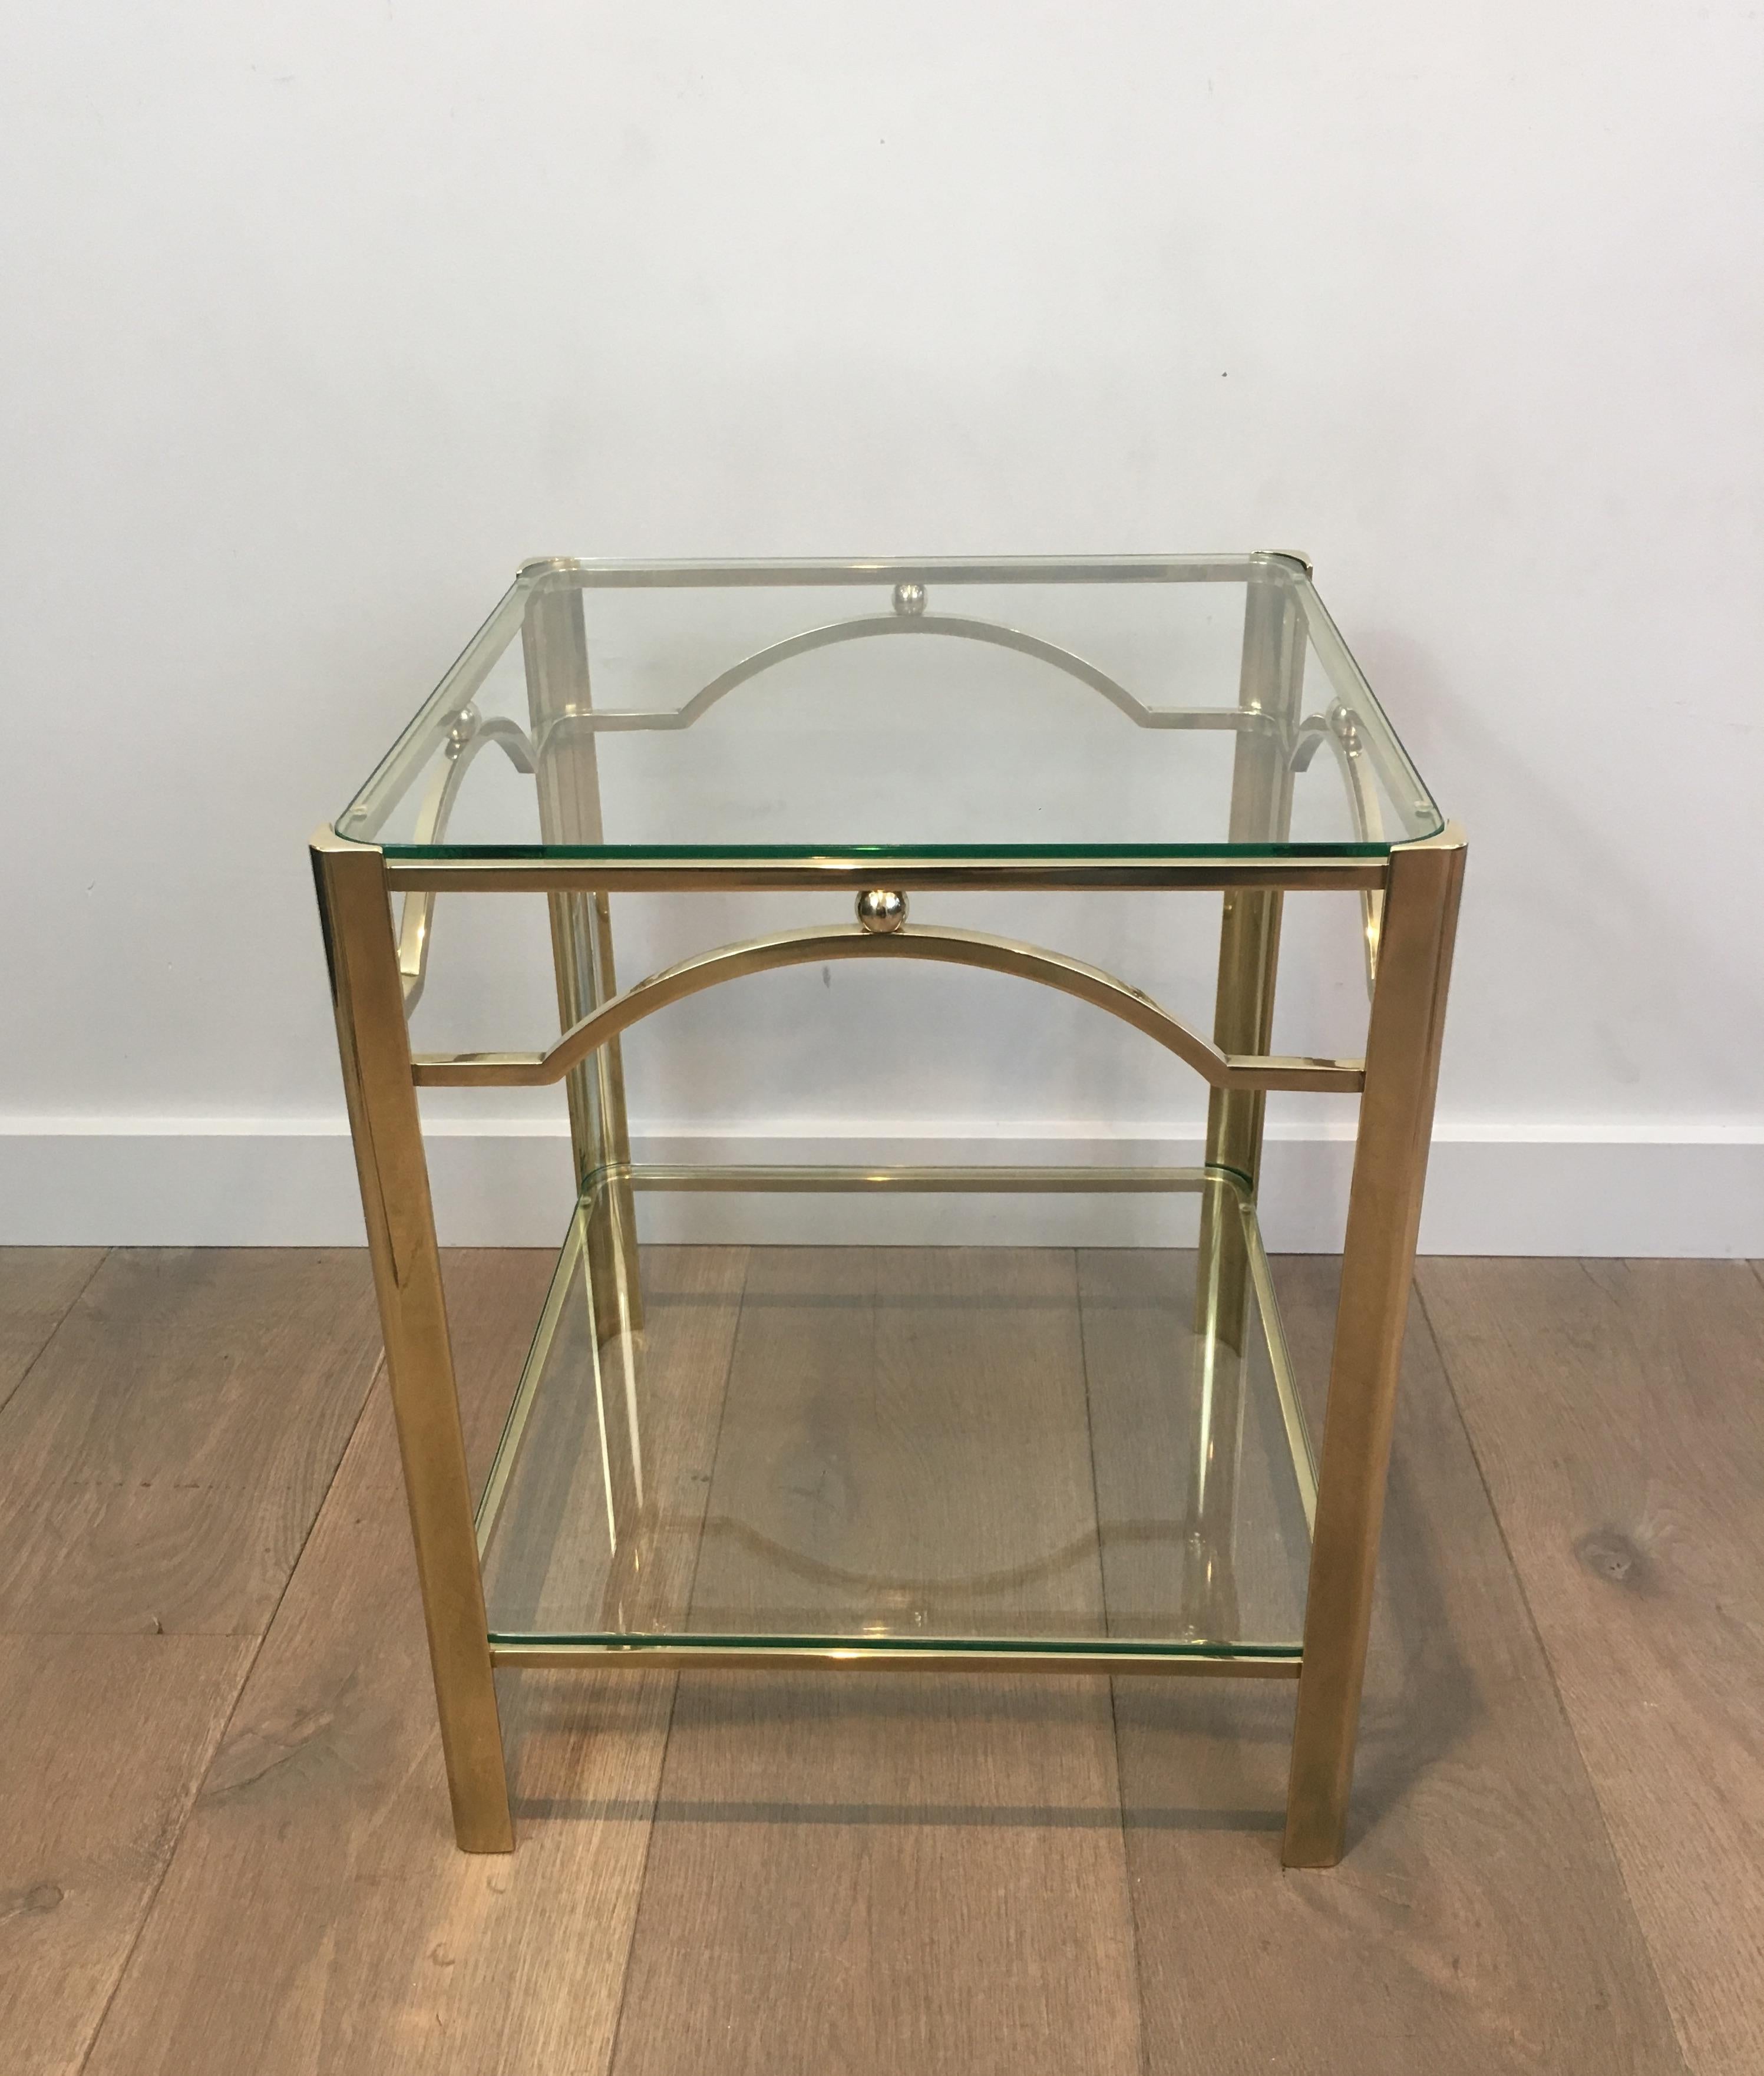 This side table is made of bronze. This is a very nice model square with rounded corners. The quality is very good and the piece is signed and numbered. This side table is attributed to famous French designer Jacques Quinet, circa 1970.